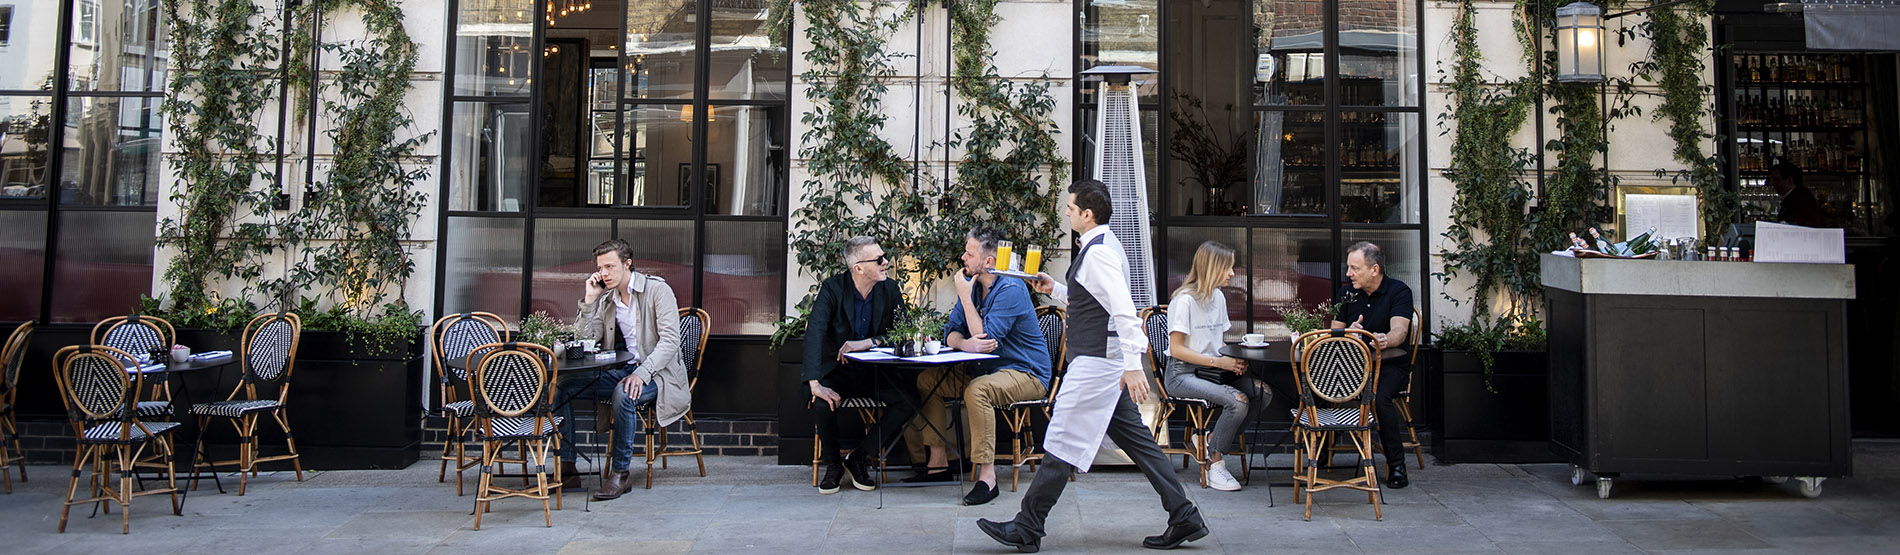 Outside of 108 Brasserie at The Marylebone